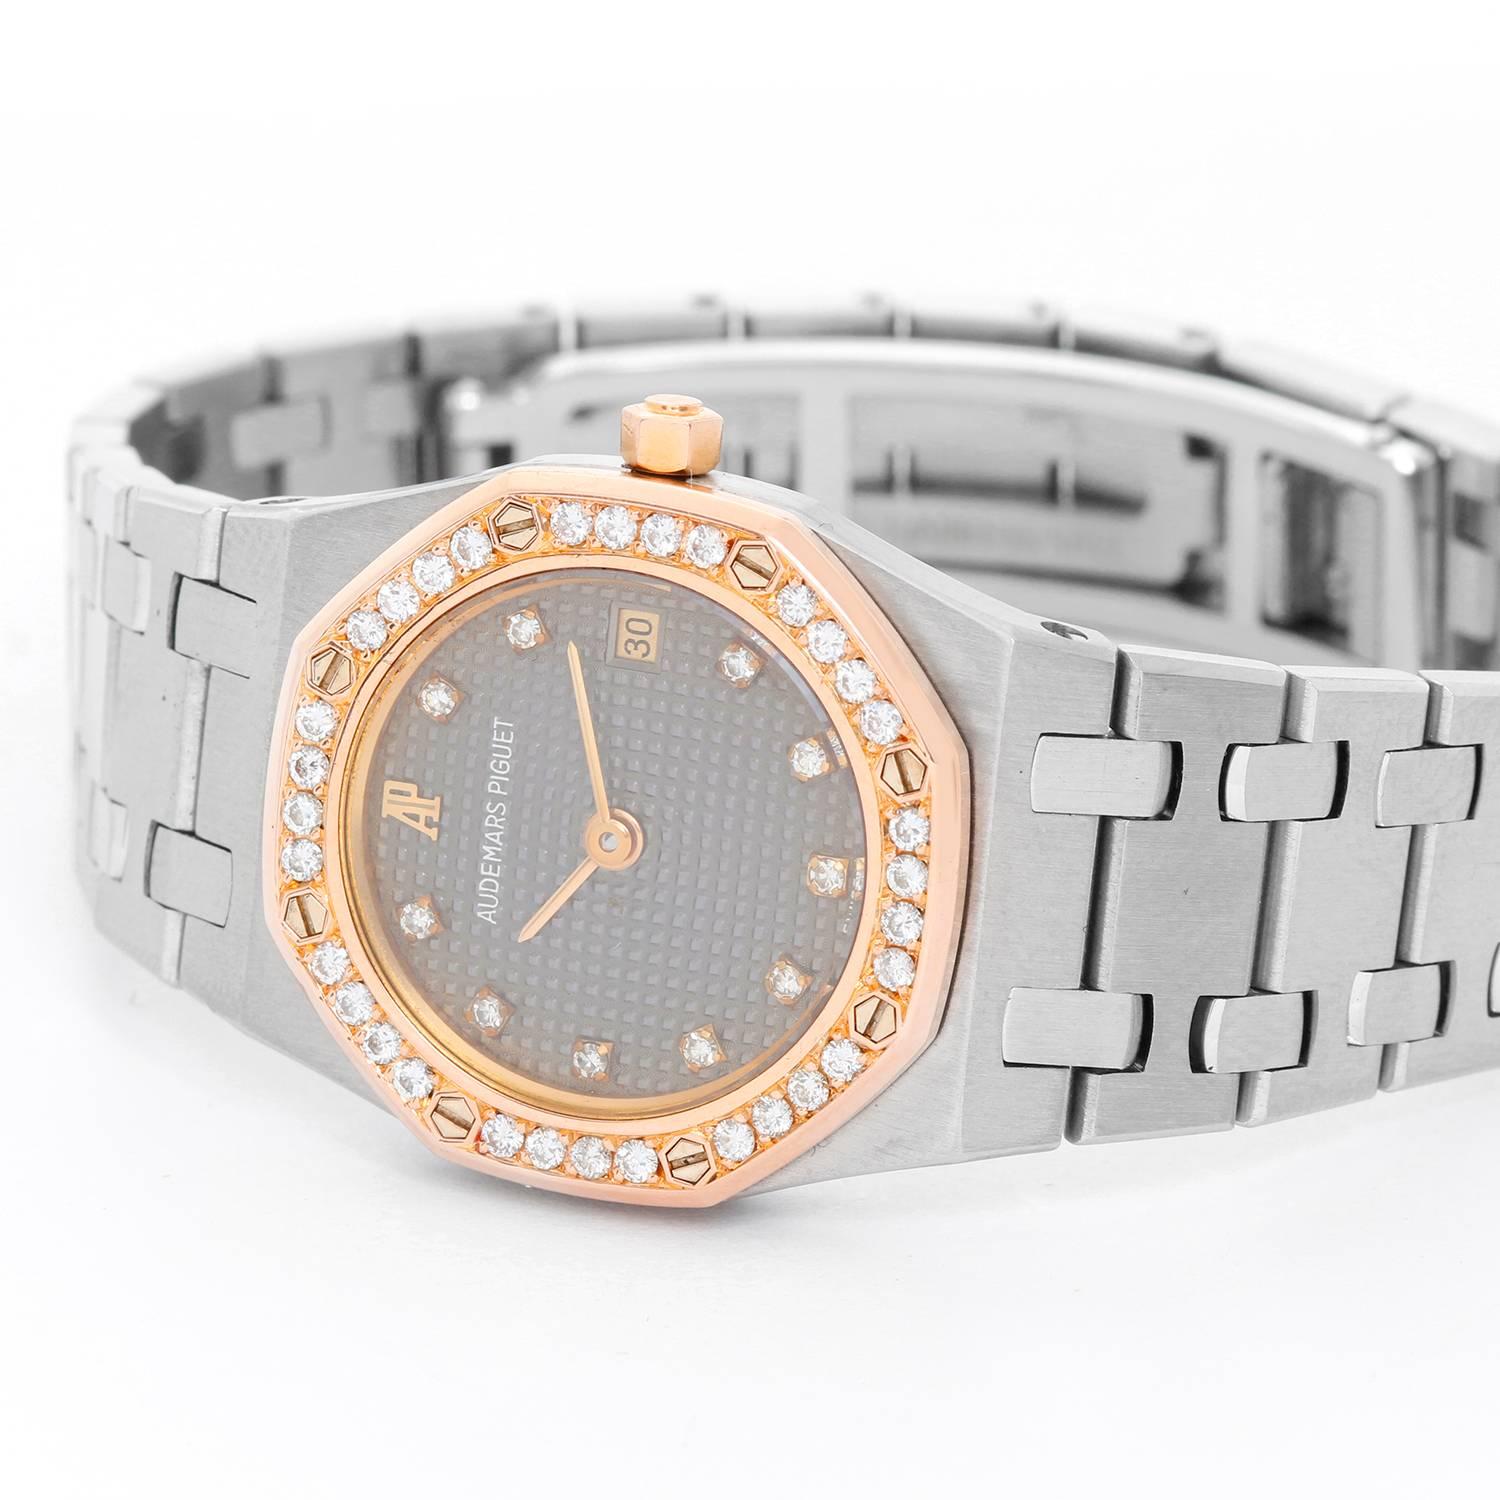 Audemars Piguet Royal Oak Ladies Watch -  Quartz. Stainless Steel ( 25 mm ) with a Rose Gold bezel with diamonds. Silver Tapisserie with diamond hour markers. Stainless steel with Deployant clasp. Pre-owned with custom box.